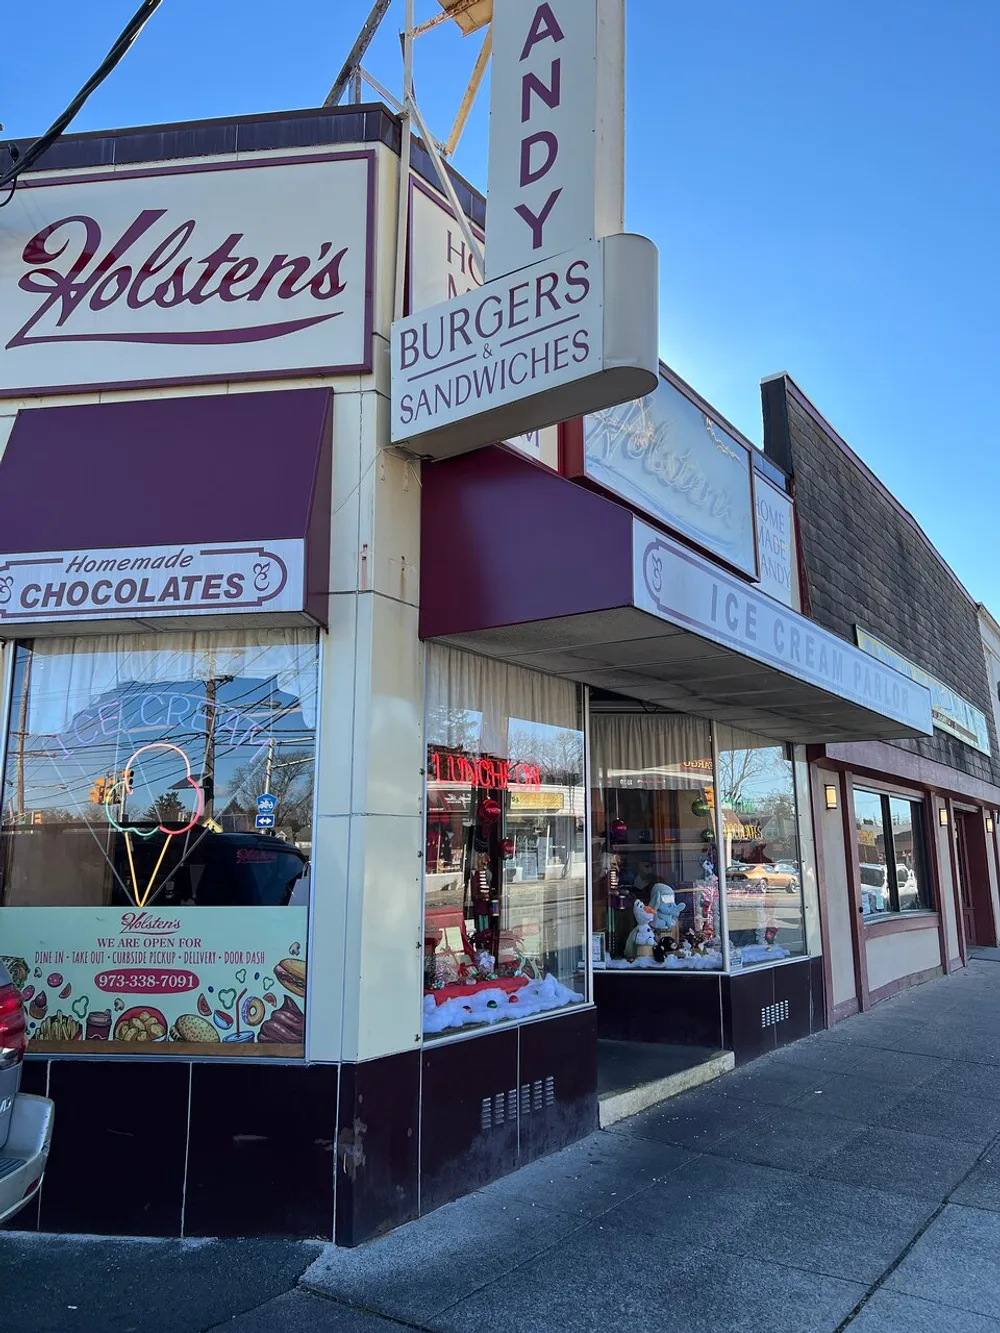 The image shows the storefront of a classic-looking diner or confectionery featuring signs for homemade chocolates burgers sandwiches and an ice cream parlor